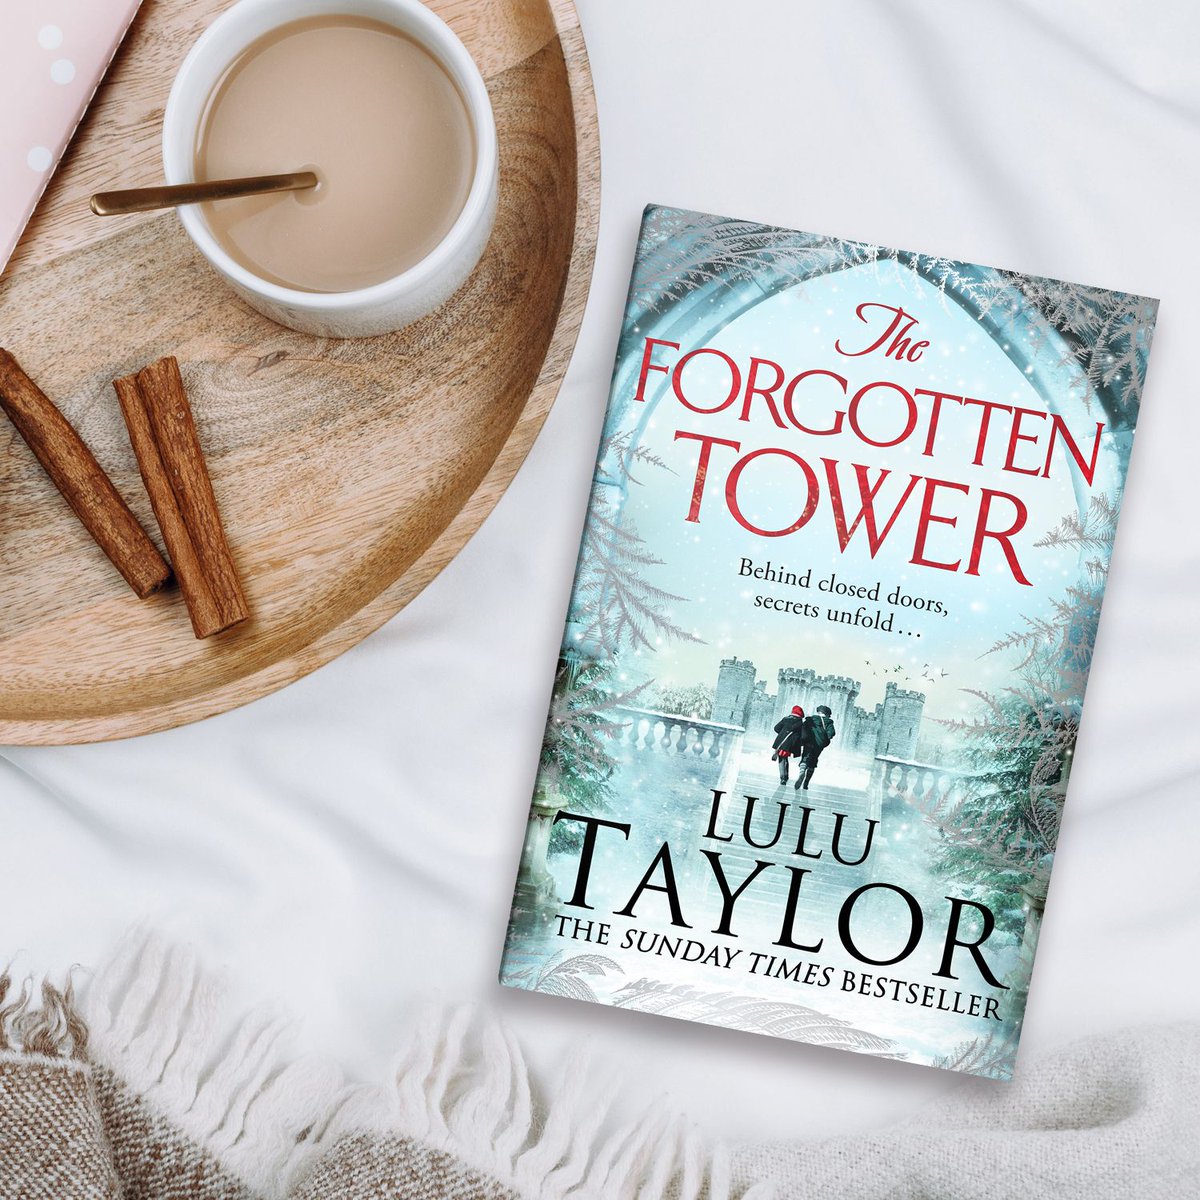 ⭐⭐⭐⭐⭐ 'Perfect for this time of year to curl up with' - Reader Review Don't miss @MissLuluTaylor's new mesmerising gothic mystery The Forgotten Tower! Out now: buff.ly/4872Mui